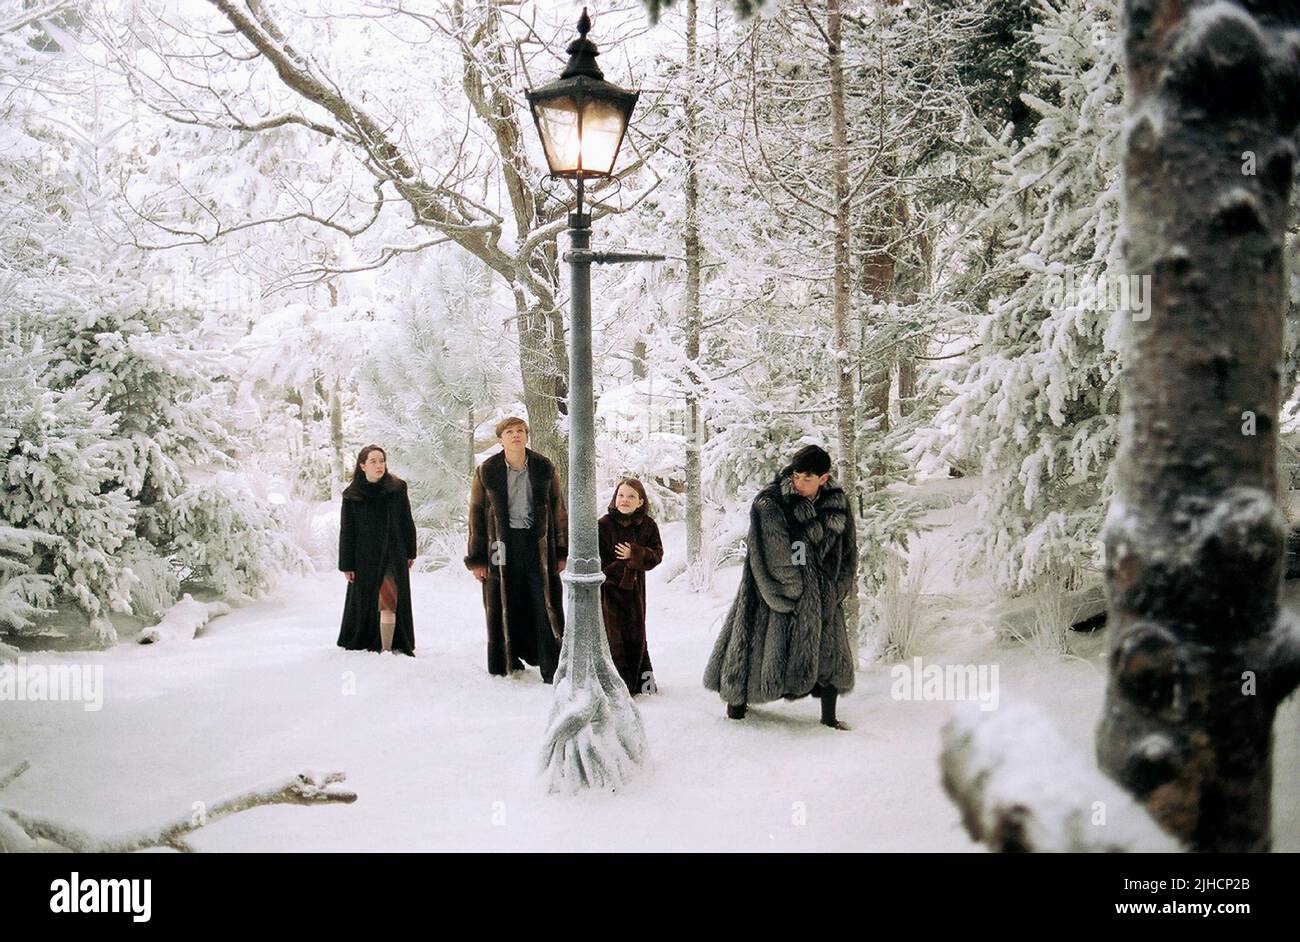 ANNA POPPLEWELL, WILLIAM MOSELEY, GEORGIE HENLEY, SKANDAR KEYNES, THE CHRONICLES OF NARNIA: THE LION  THE WITCH AND THE WARDROBE, 2005 Stock Photo